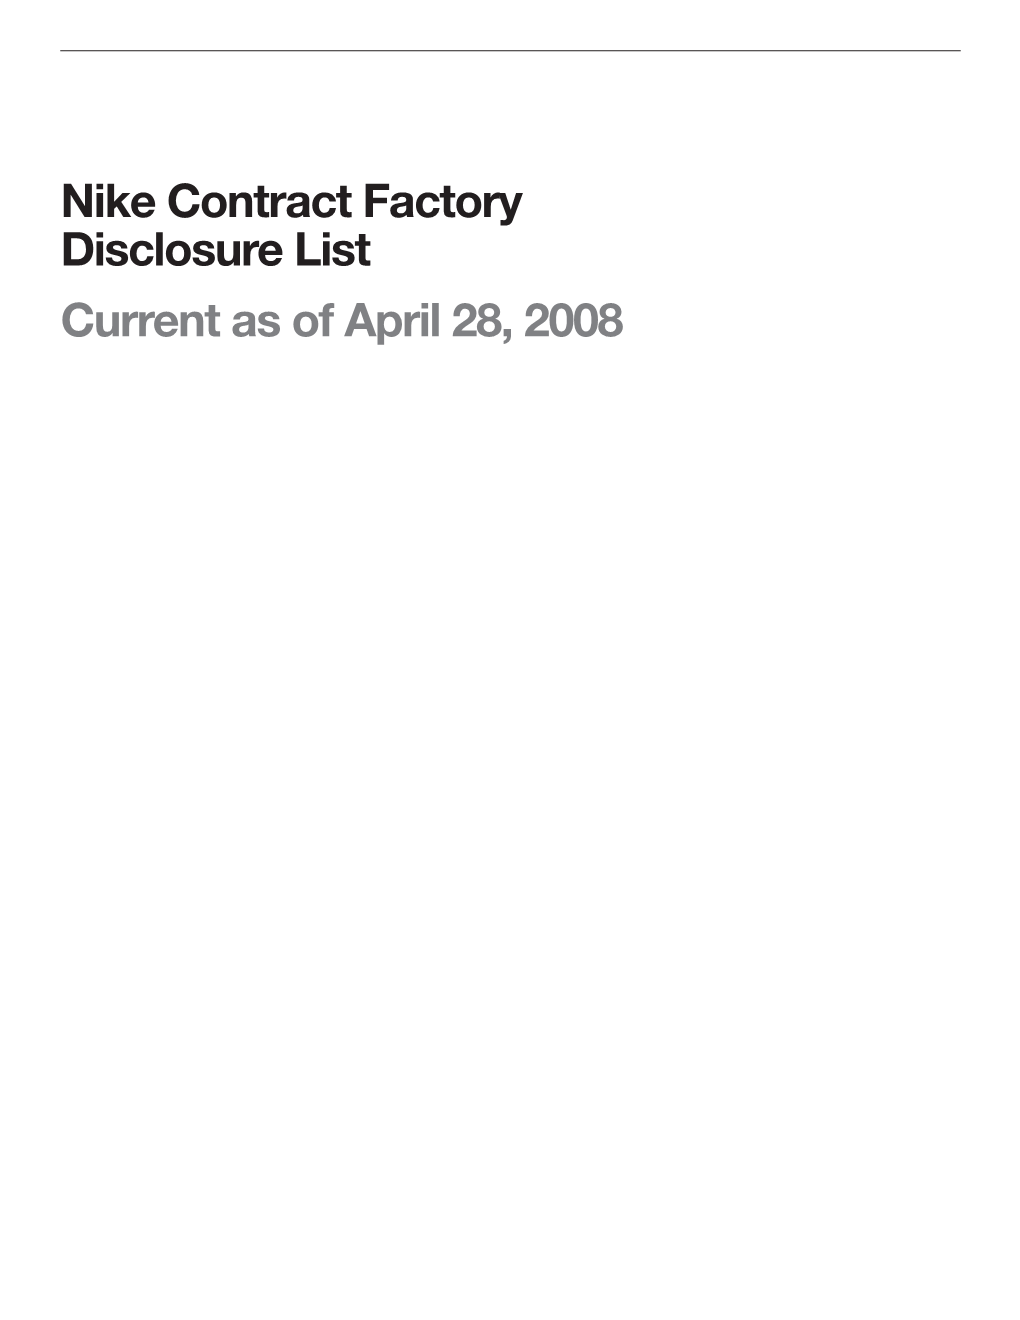 Nike Contract Factory Disclosure List Current As of April 28, 2008 2007 Nike Contract Factory Disclosure List